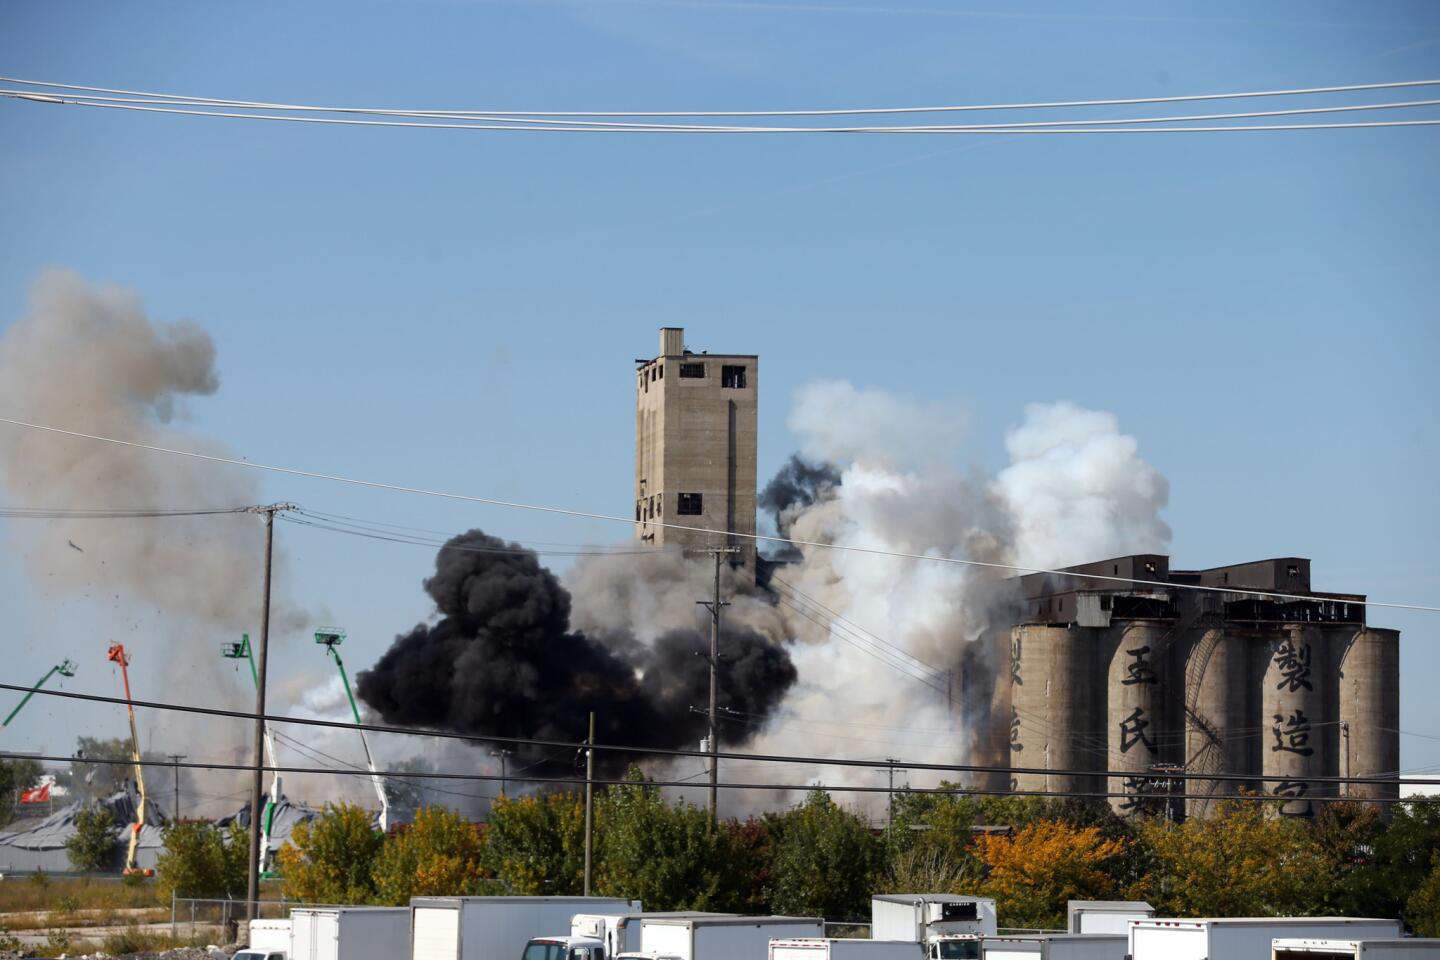 An explosion on Damen just north of the Stevenson Expressway for filming of the movie "Transformers: Age of Extinction."